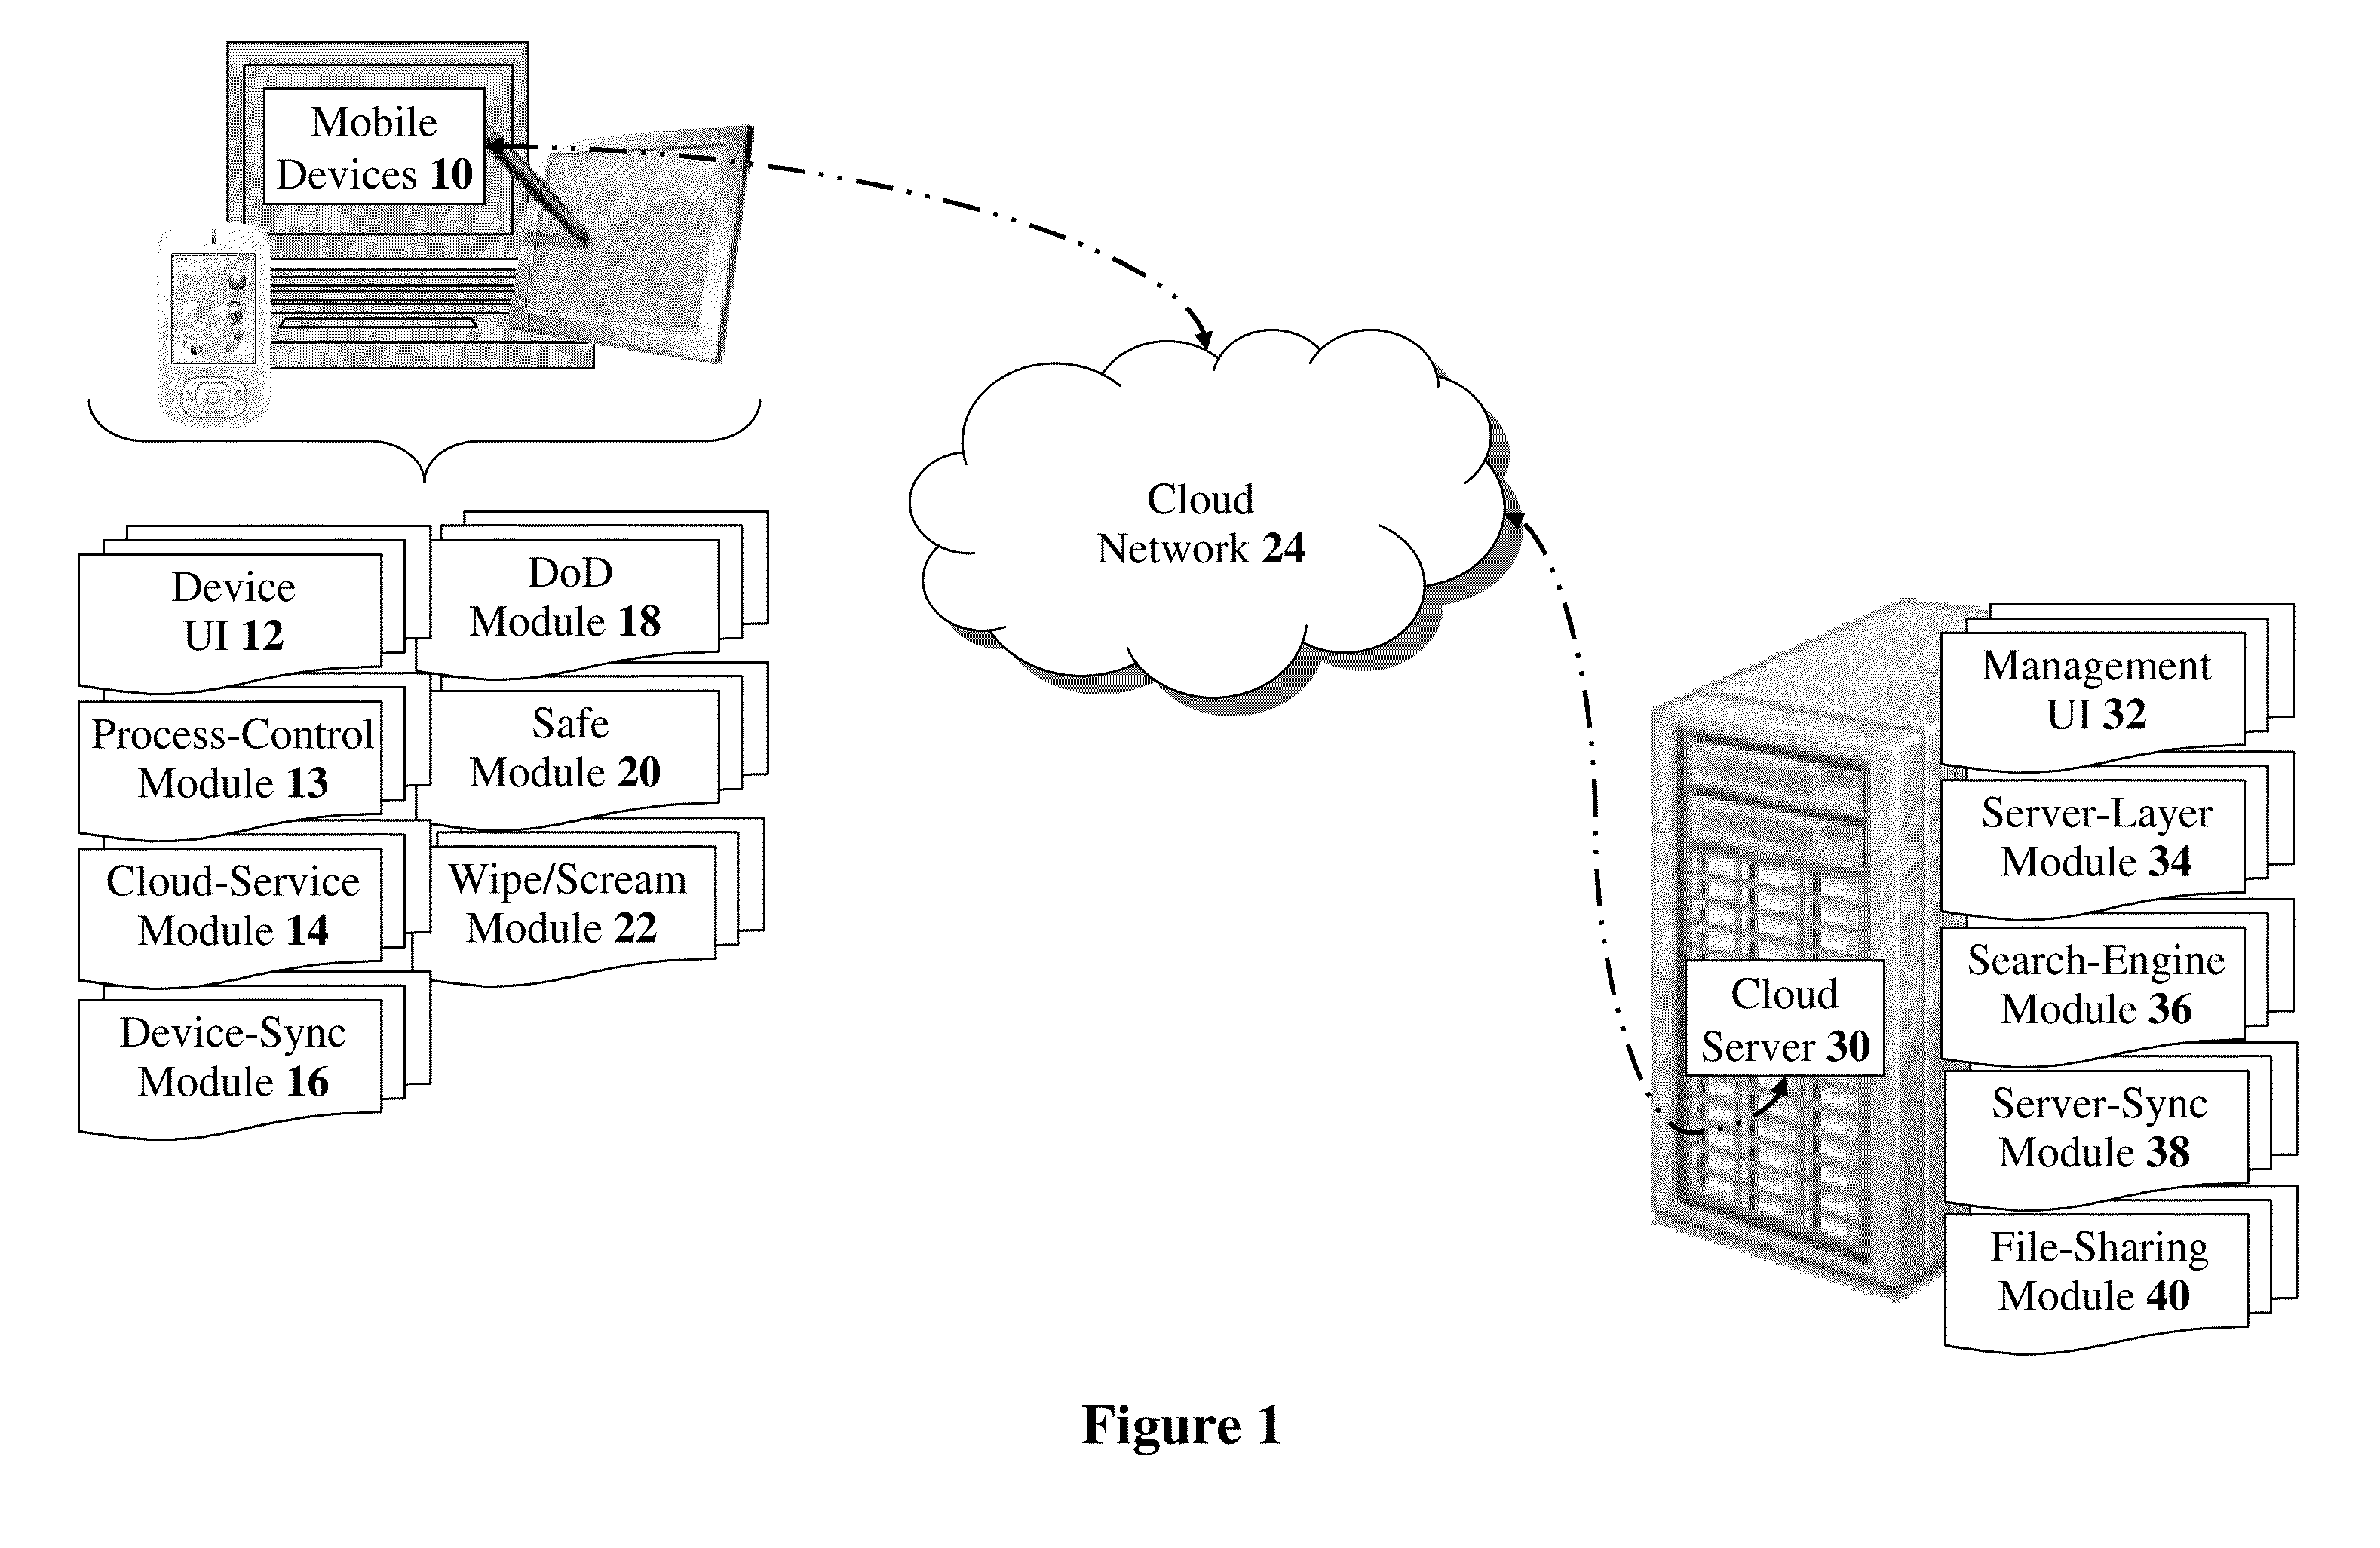 Methods, devices, and systems for enabling a personal cloud-computing environment with ubiquitous mobile access and source-independent, automated data aggregation